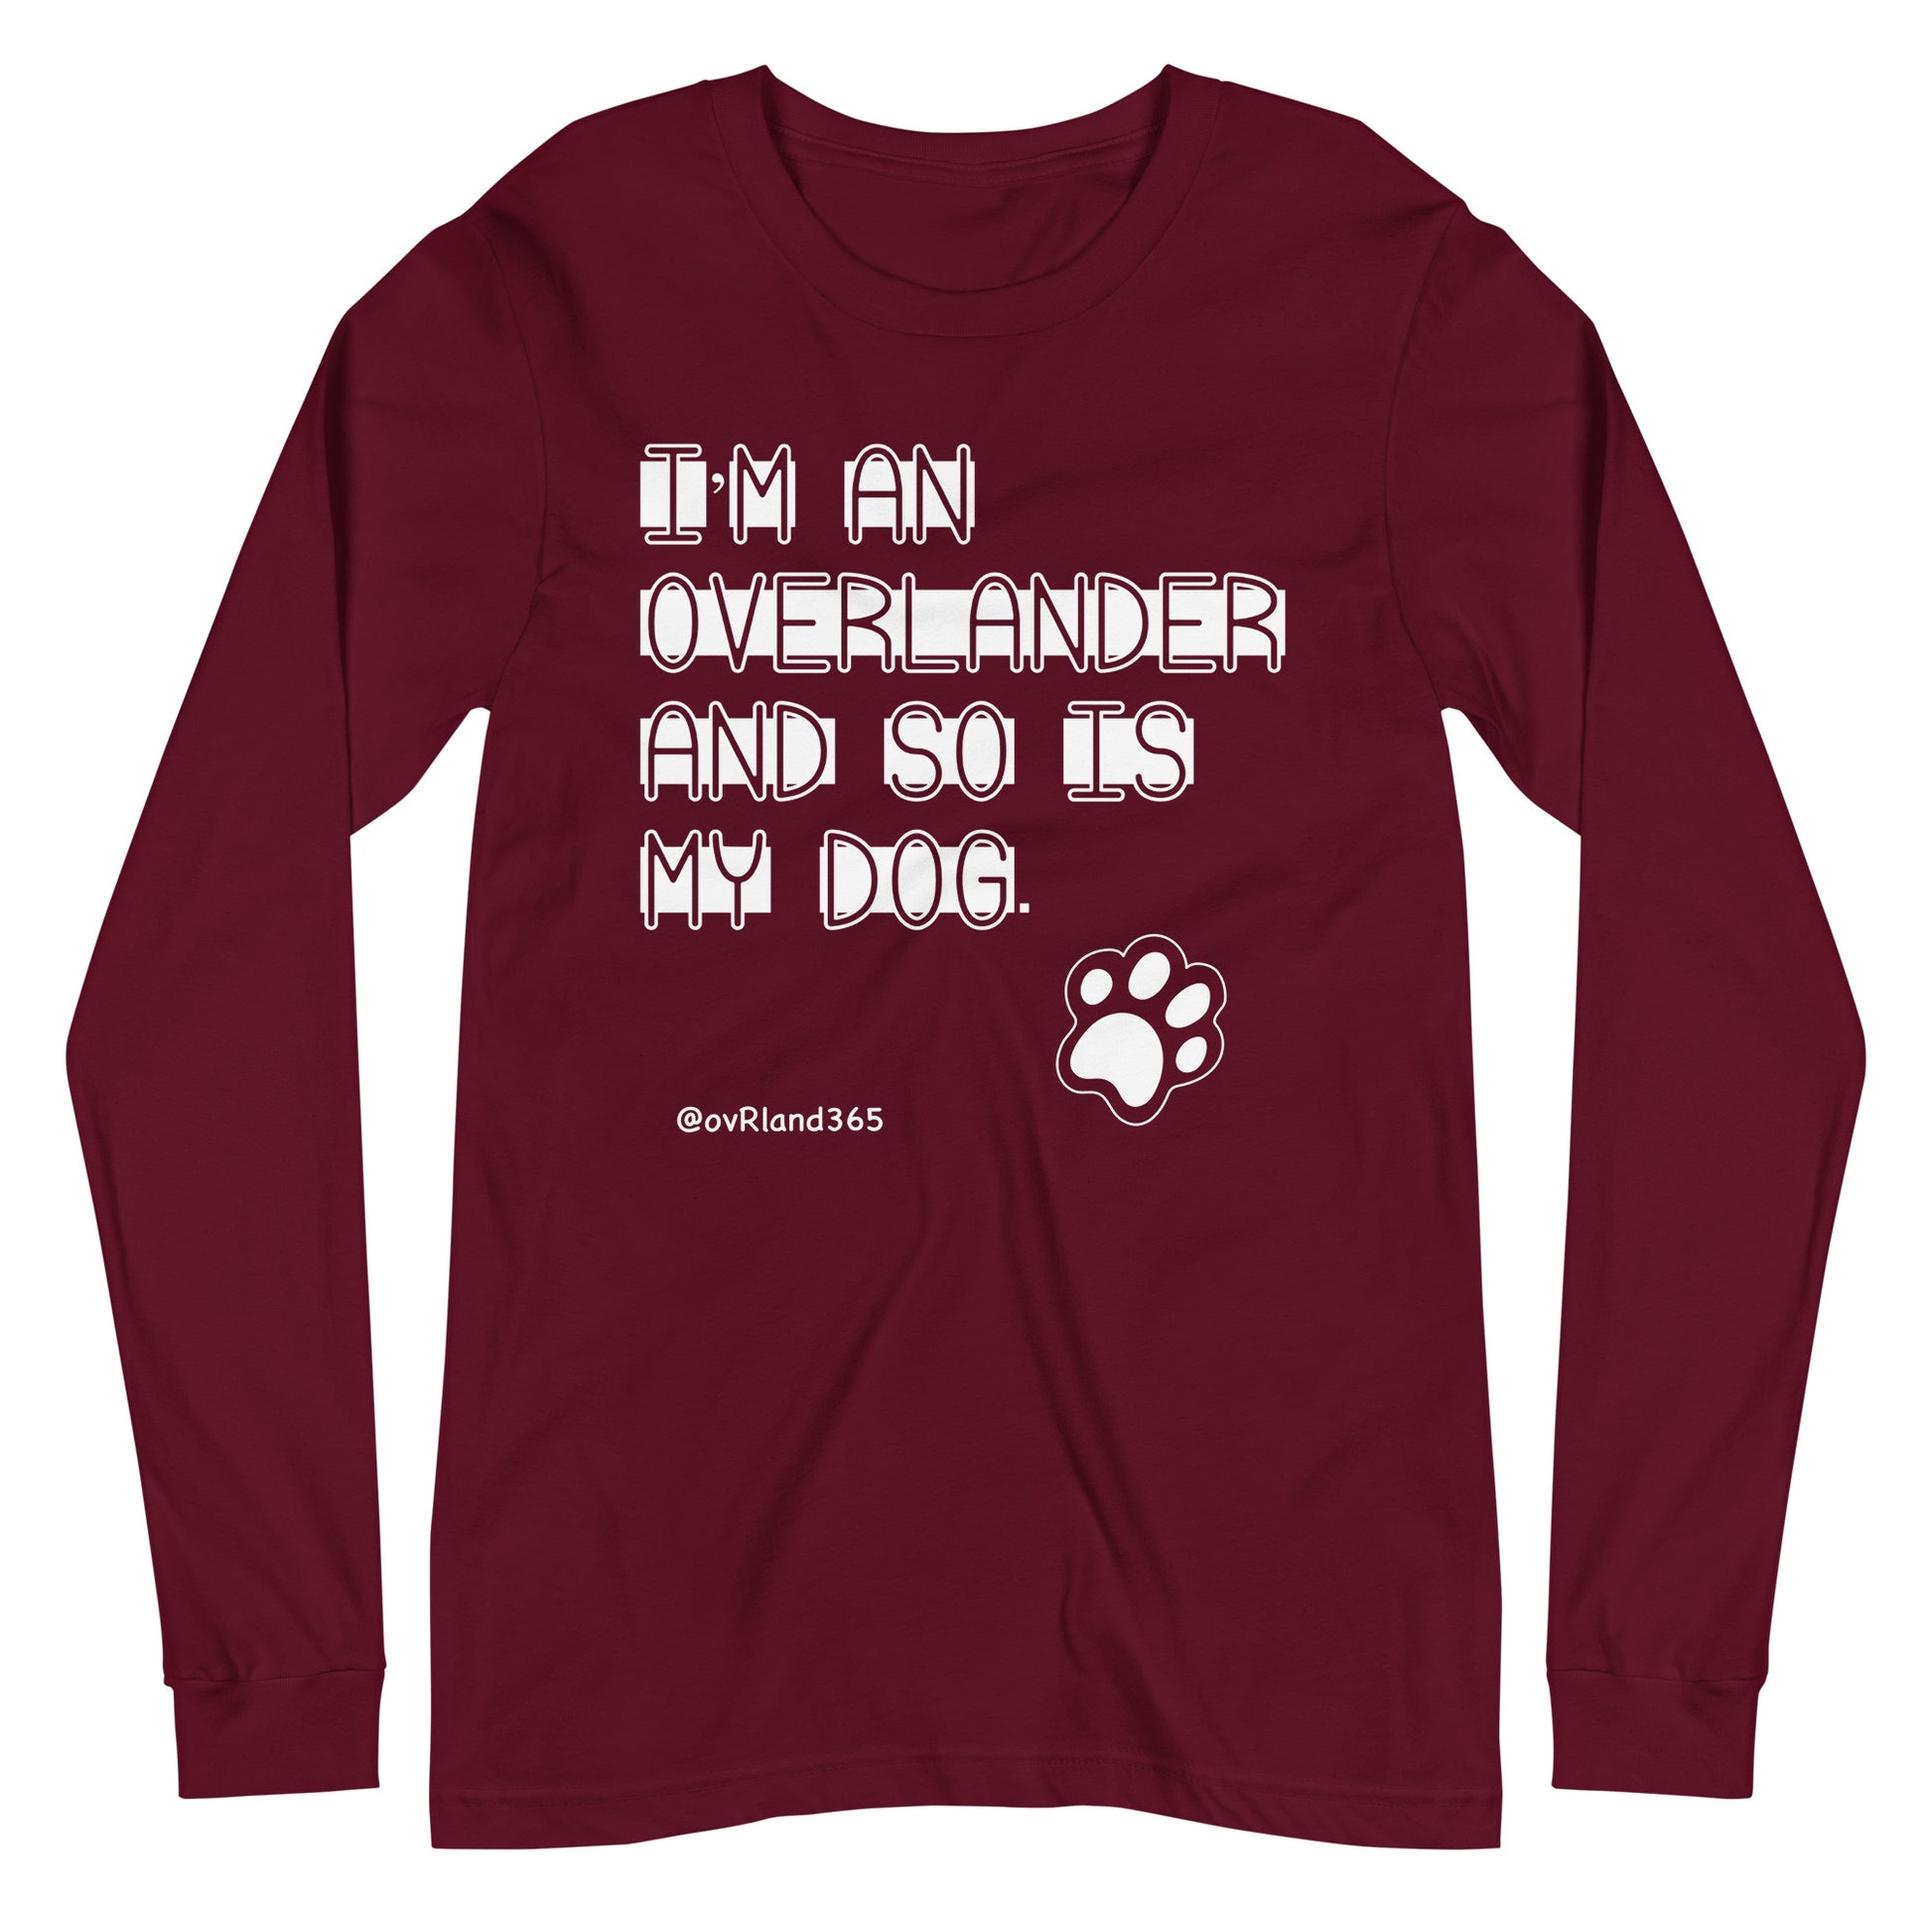 I'm an overlander and so is my dog. Maroon long-sleeve with a paw print. overland365.com